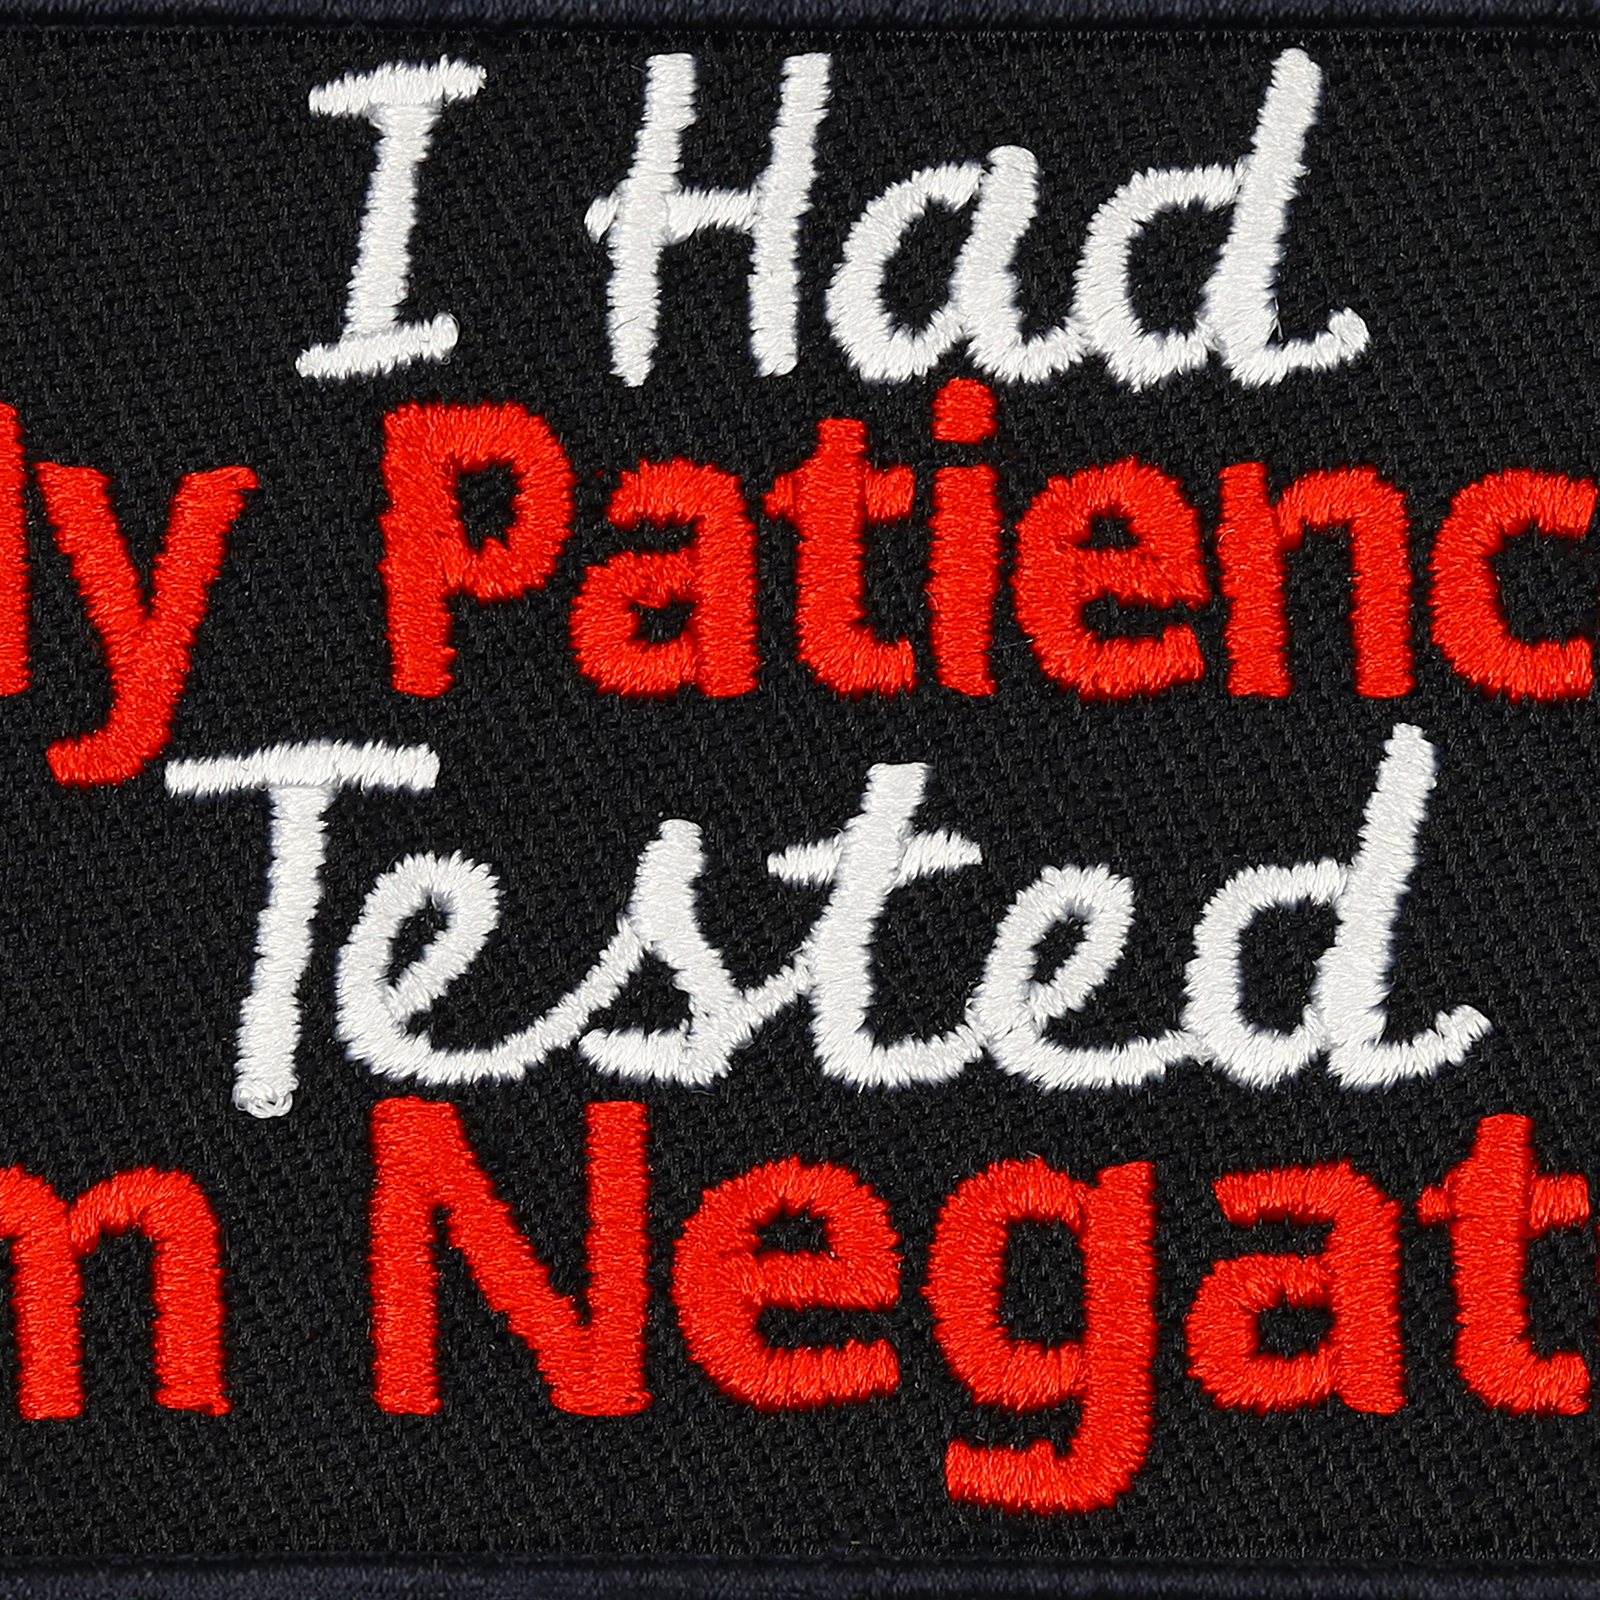 I had my patience tested...I'm negativ - Patch